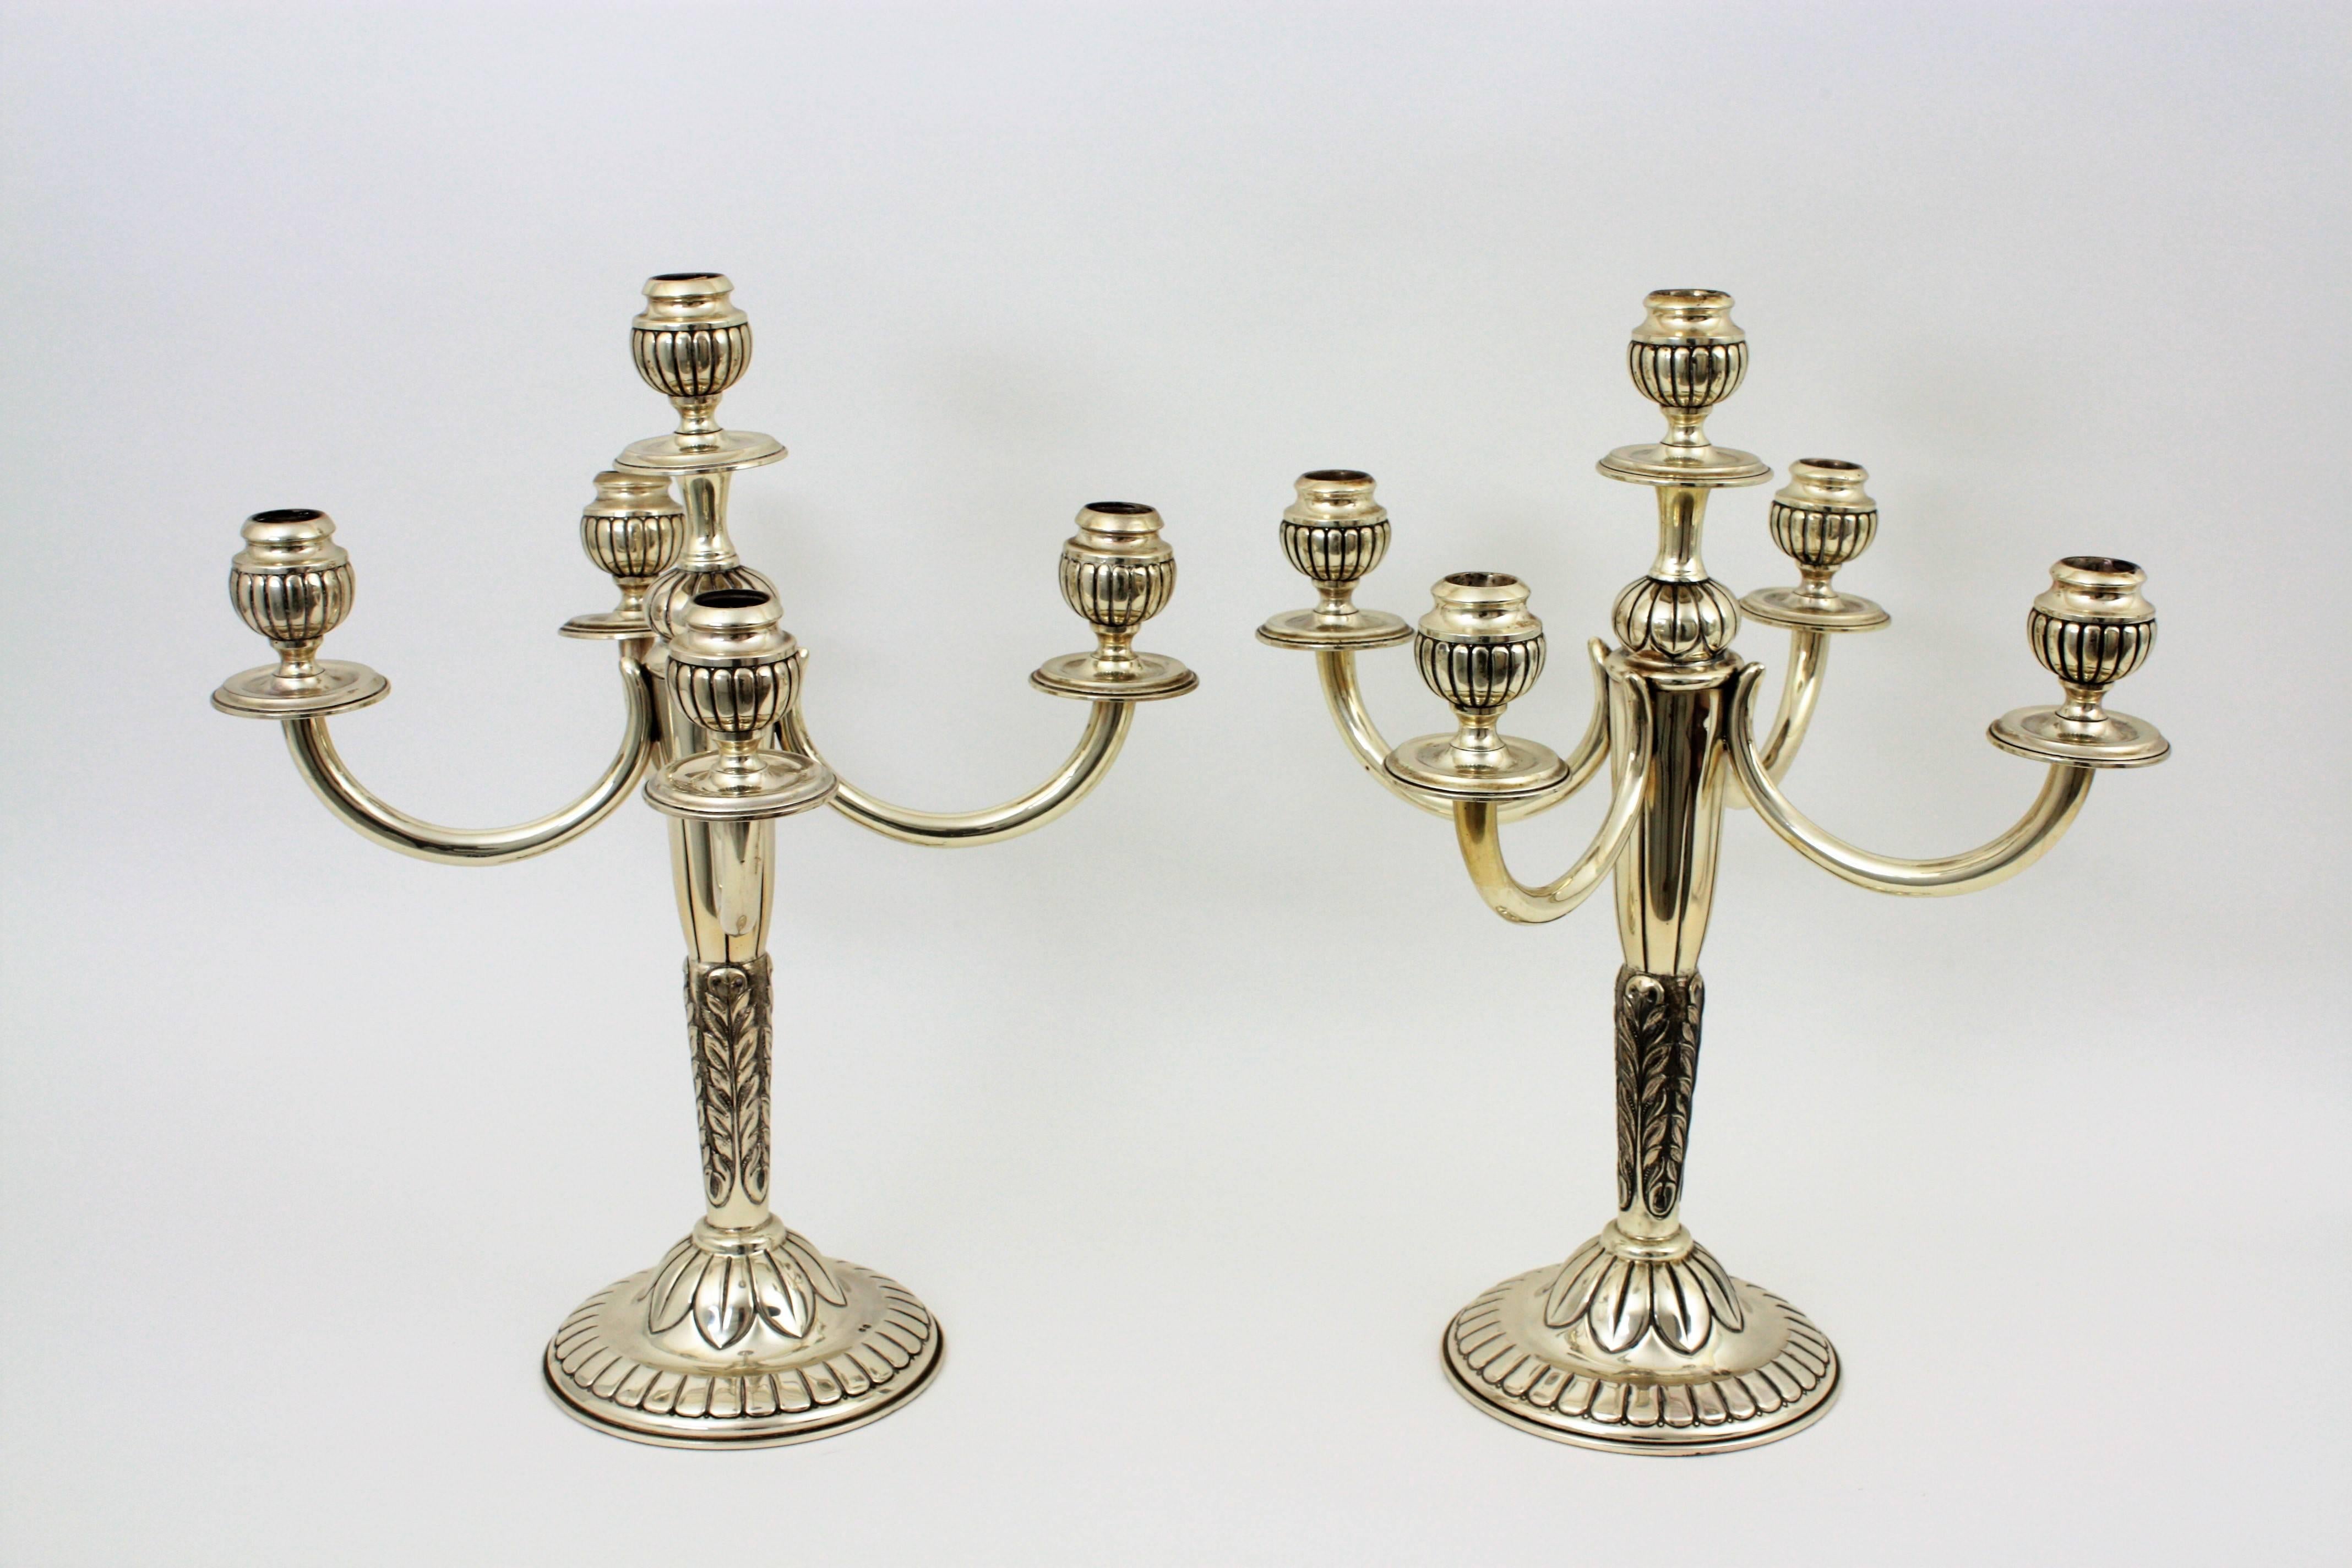 Pair of 1950s sterling silver candelabra with four branches and a higher central branch. 
Stamps: Star - 925.
Weight: 650gr each one.
Dimensions: H: 44 cm; diameter: 37 cm; diameter of the foot: 16 cm.
Spain, 1950s-1960s.

Ref 2143 //